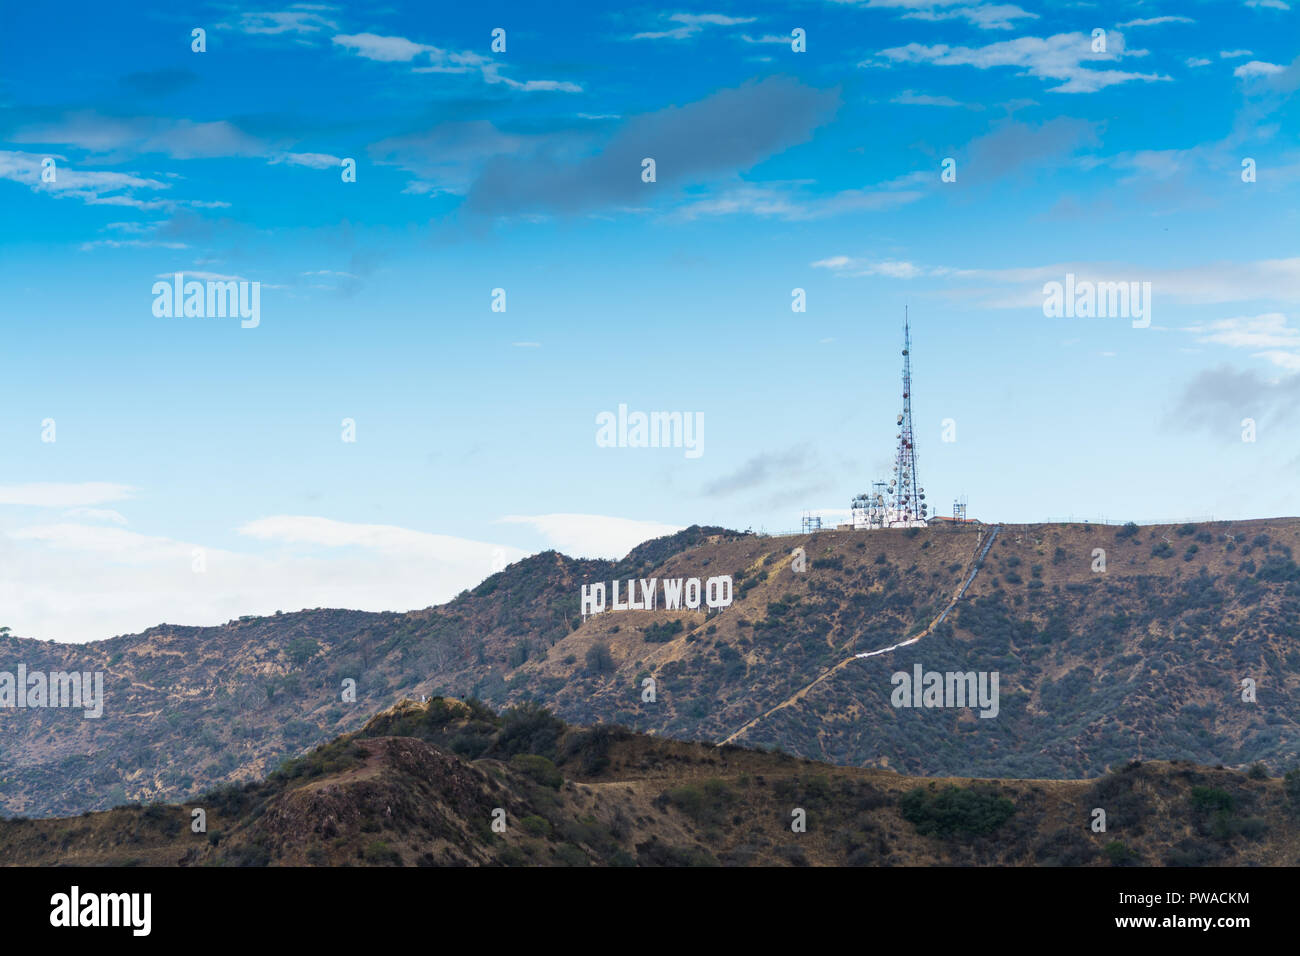 Los Angeles, CA, USA - October 28, 2016: World famous Hollywood sign under a blue sky with clouds Stock Photo